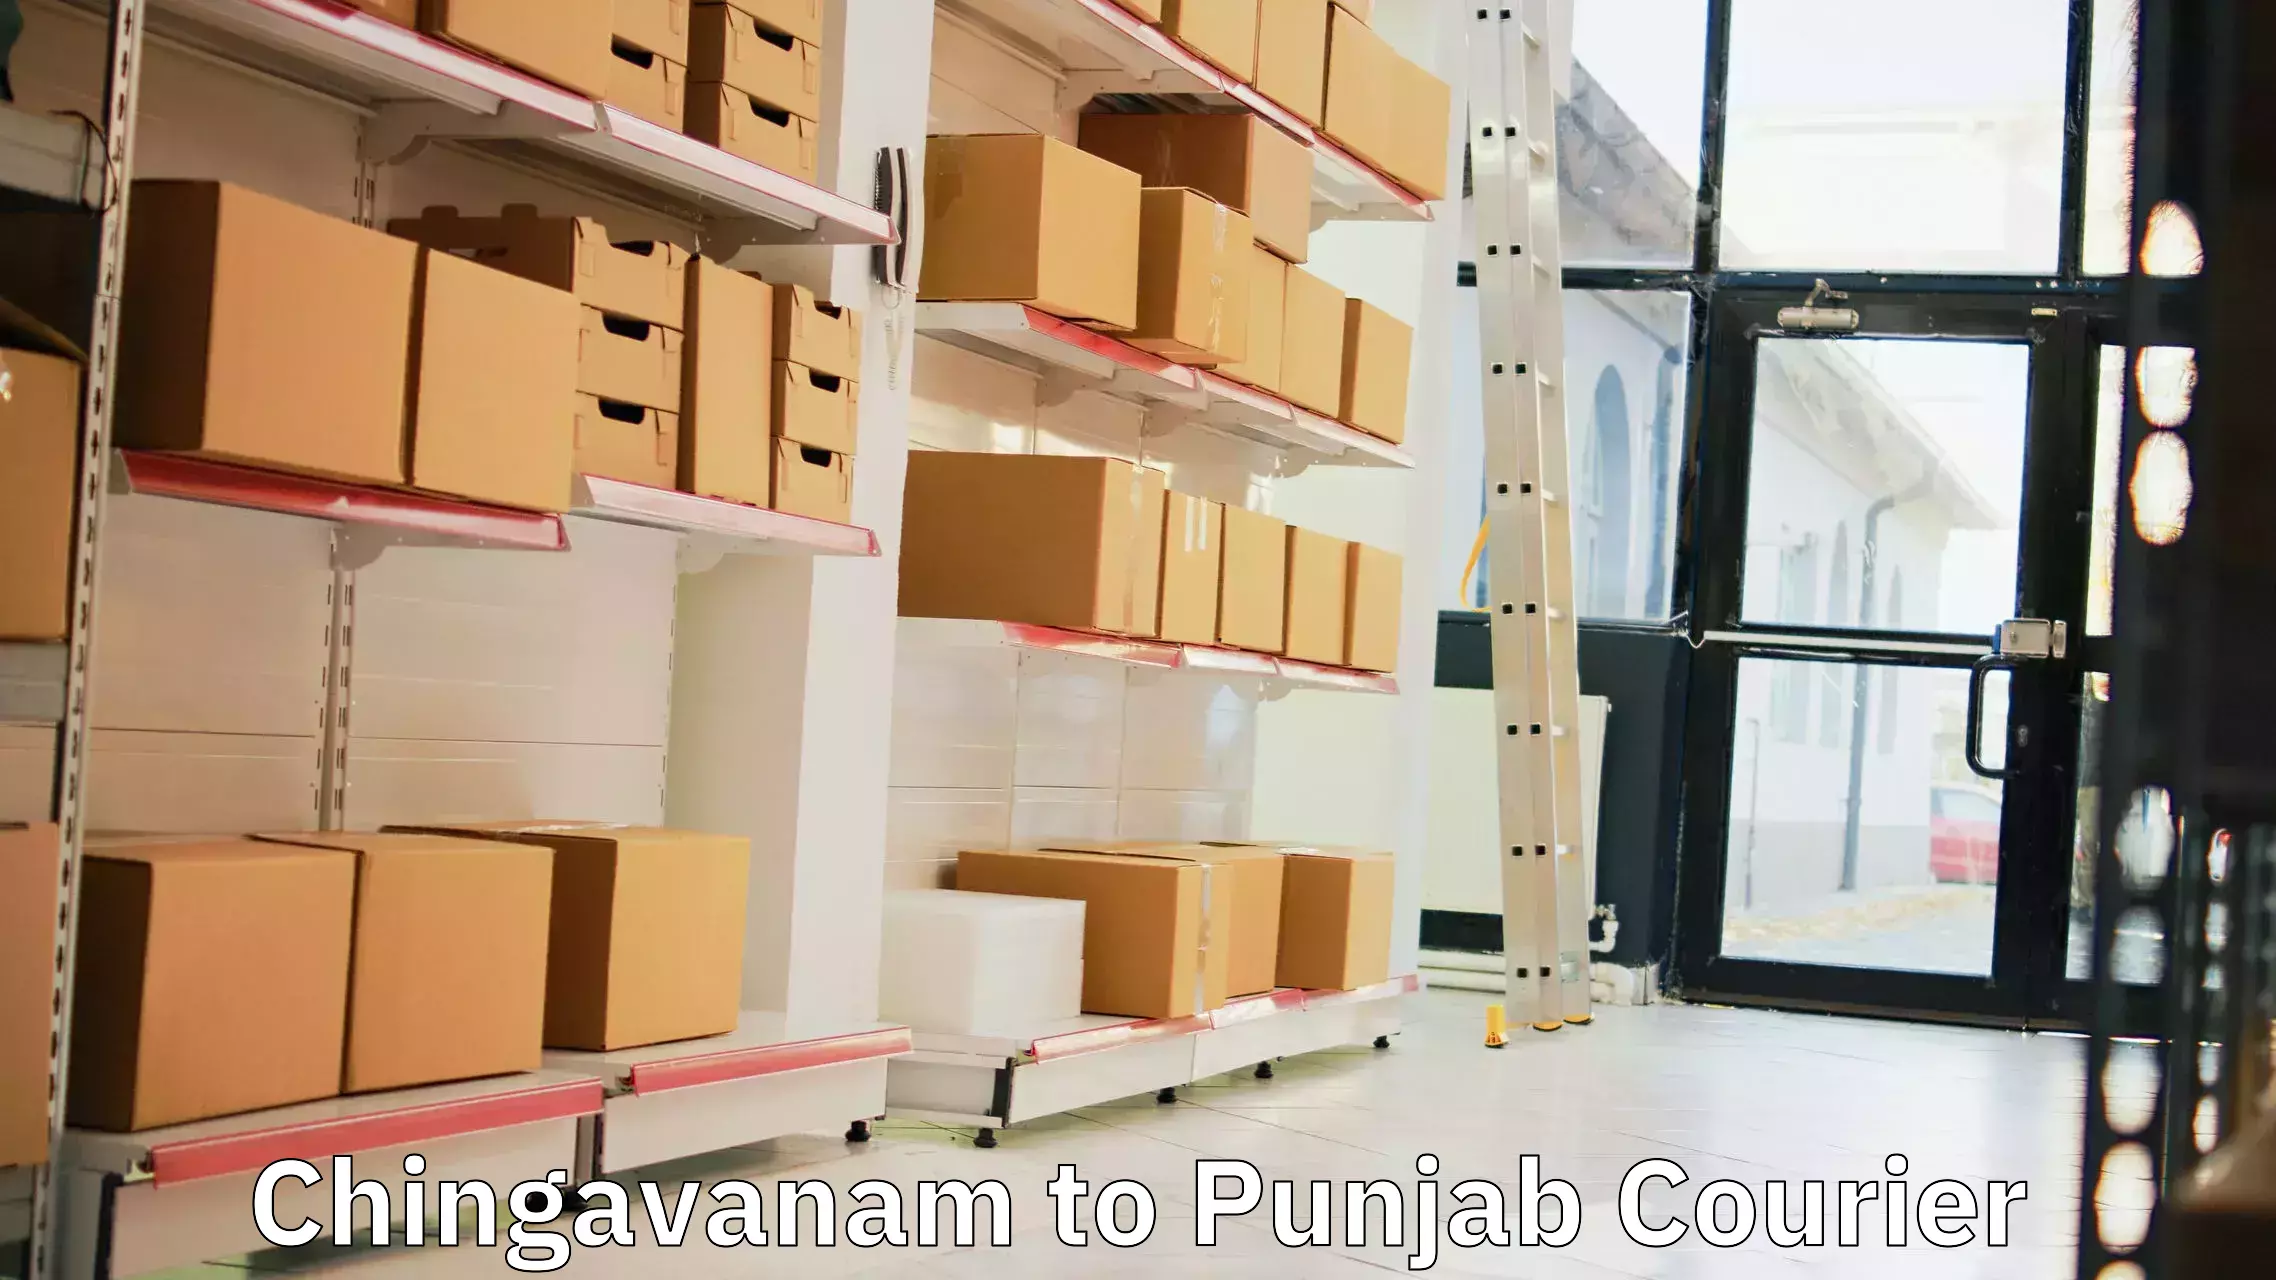 On-call courier service Chingavanam to Ludhiana